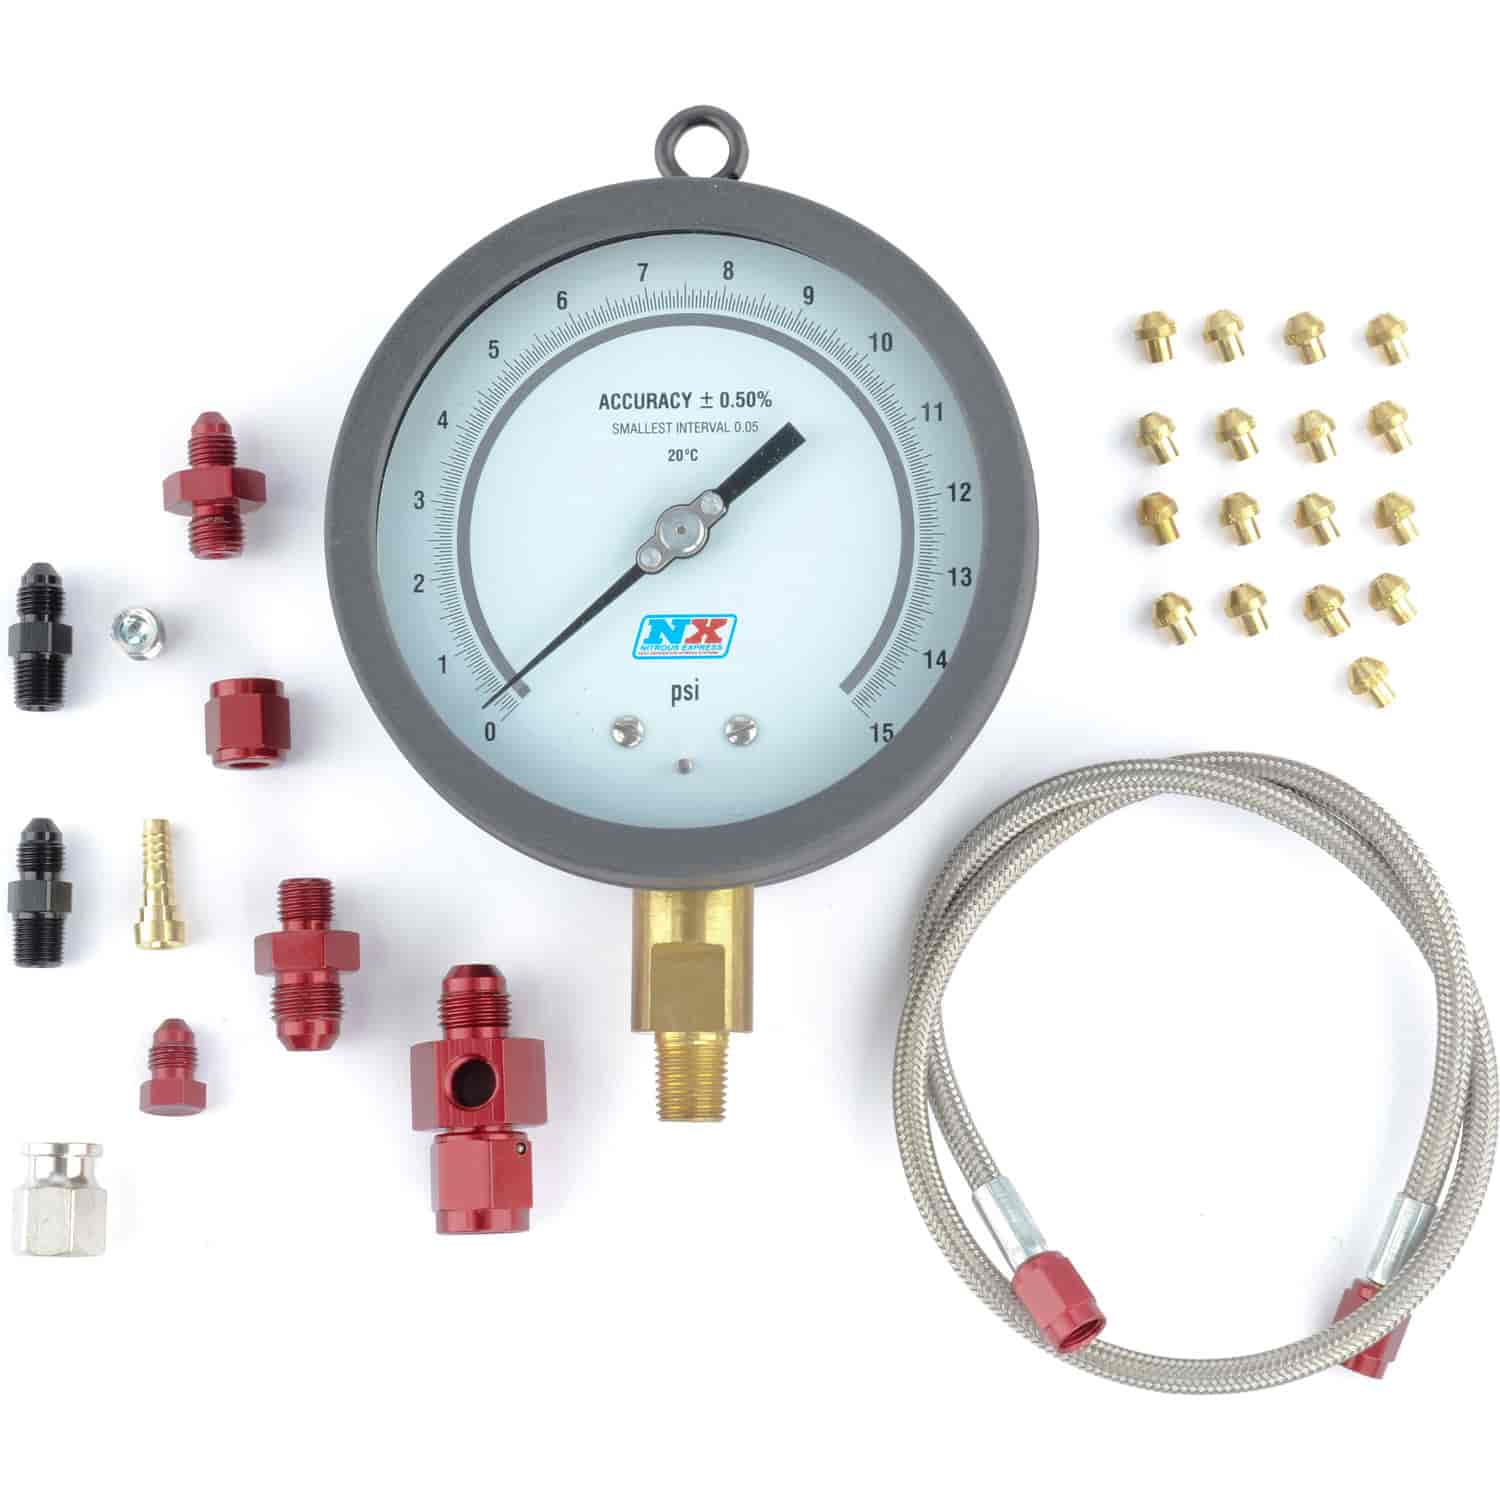 Master Flo-Check Pro Nitrous Pressure Check Kit 6" Certified Gauge with Plastic Case